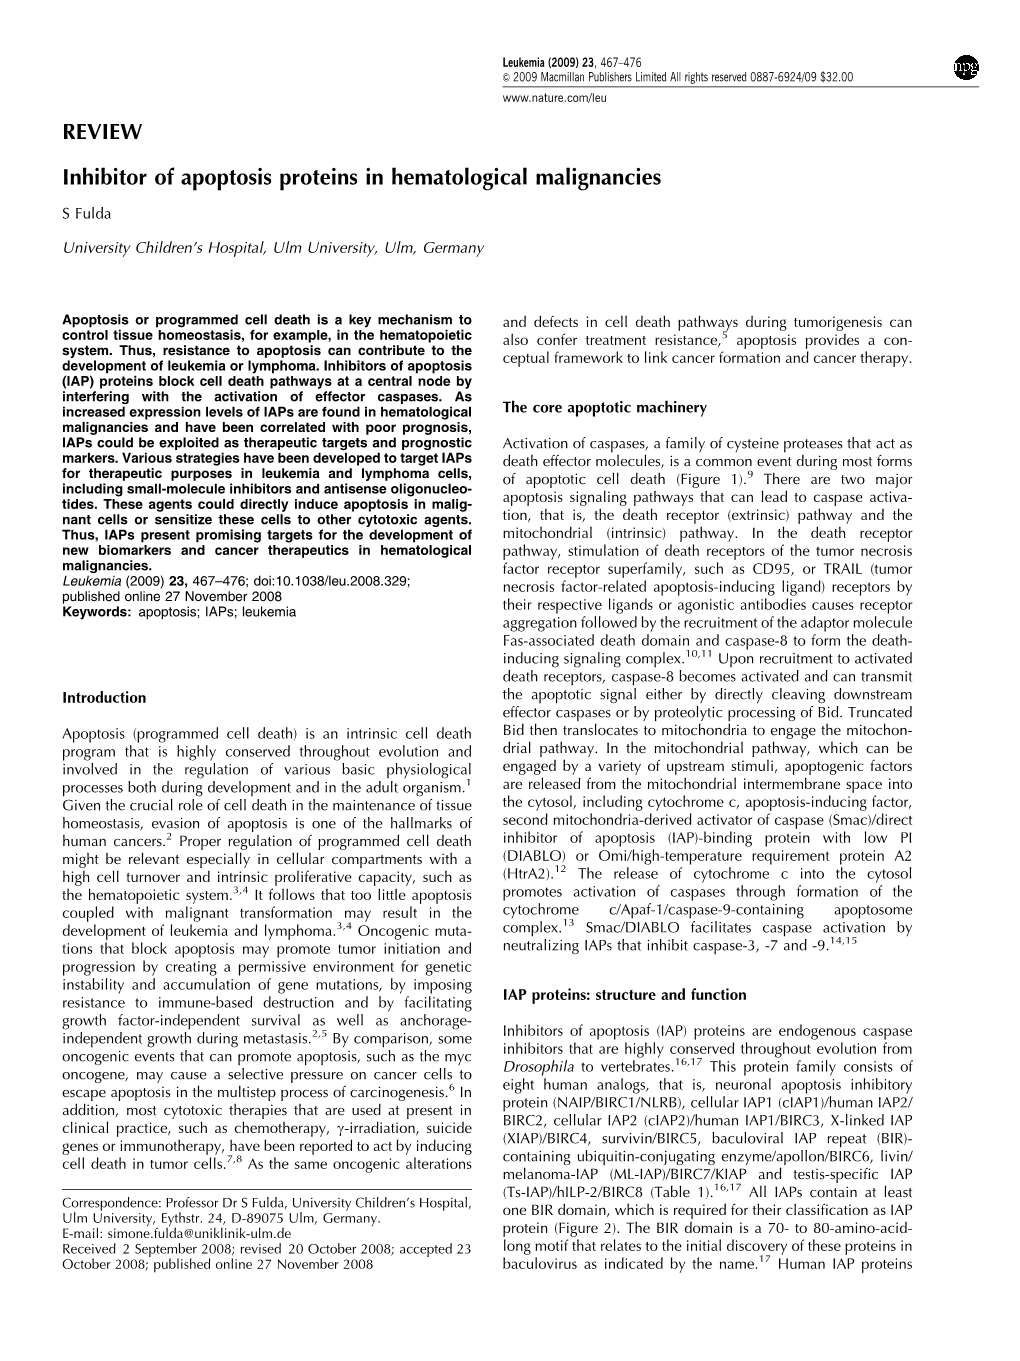 REVIEW Inhibitor of Apoptosis Proteins in Hematological